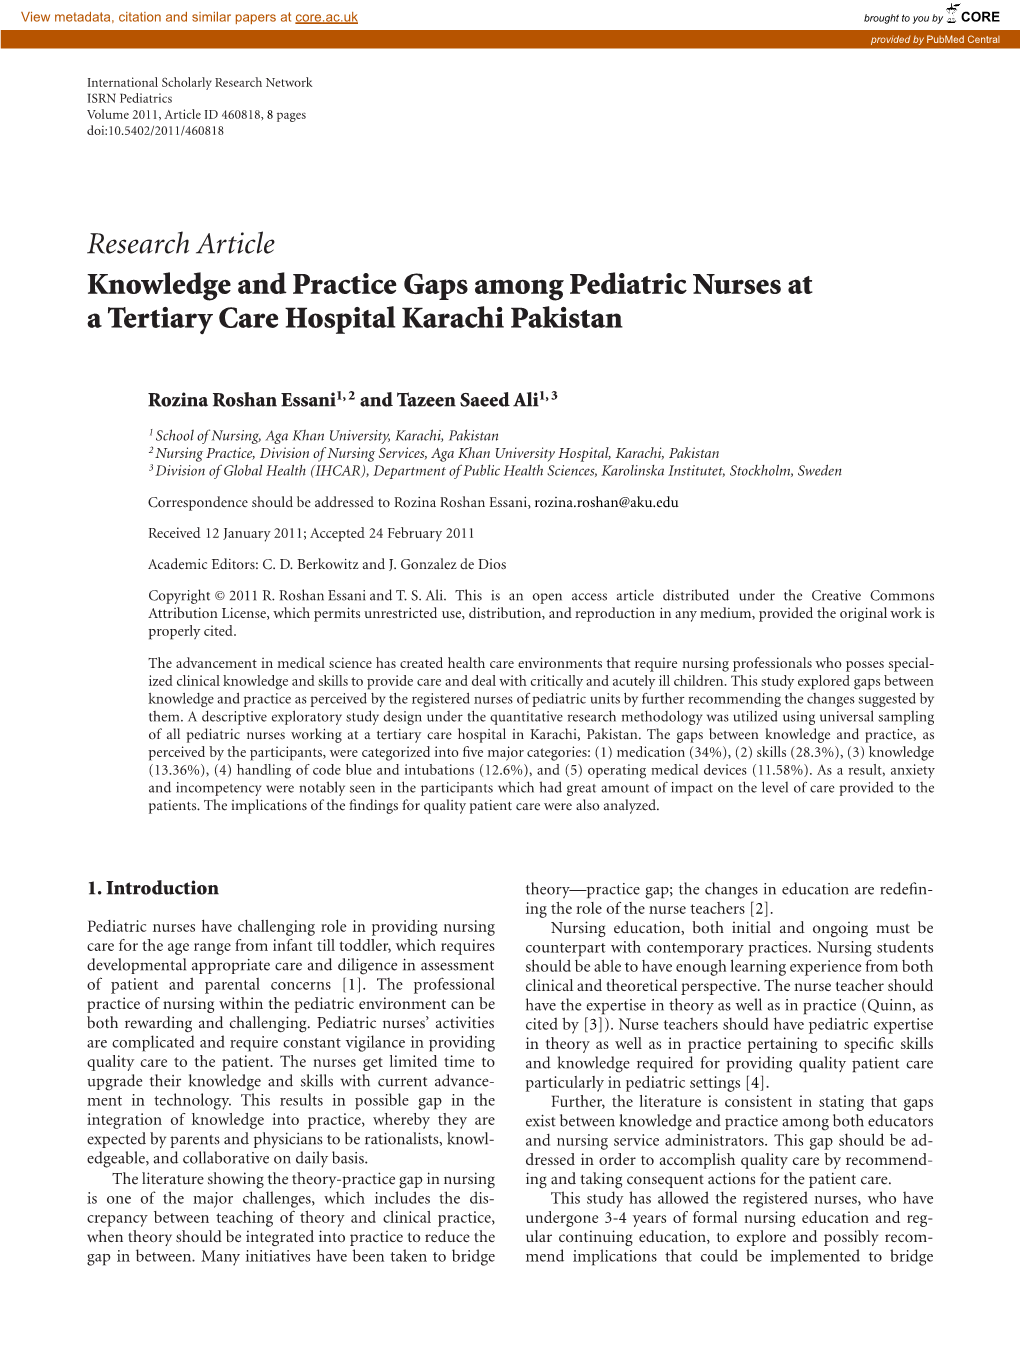 Research Article Knowledge and Practice Gaps Among Pediatric Nurses at a Tertiary Care Hospital Karachi Pakistan